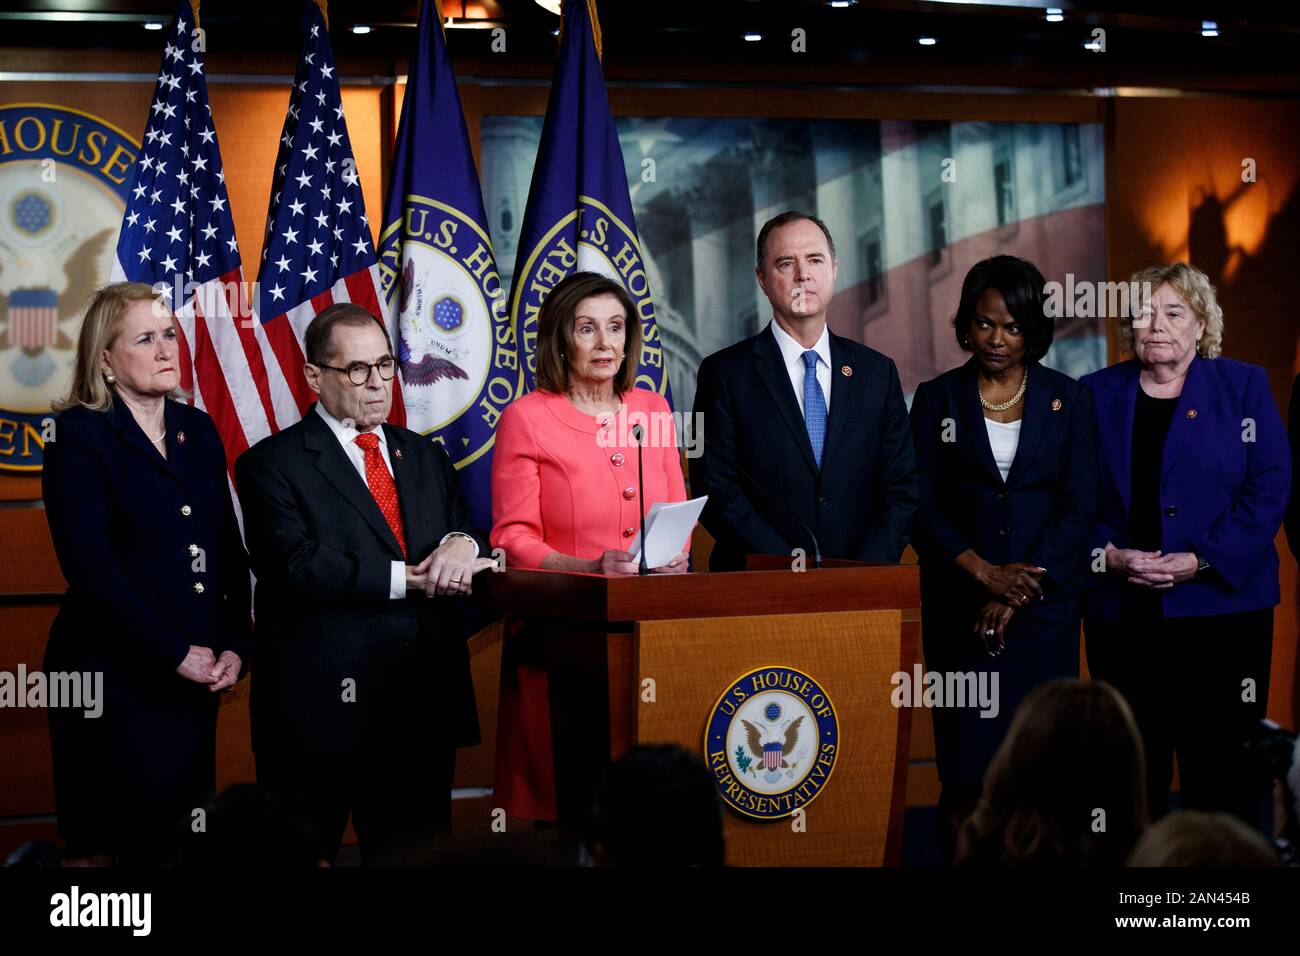 Washington, USA. 15th Jan, 2020. U.S. House Speaker Nancy Pelosi (3rd L) speaks during a press conference in Washington, DC, the United States, on Jan. 15, 2020. The U.S. House of Representatives officially sent impeachment articles against President Donald Trump to the Senate on Wednesday evening to allow a trial to get underway. Credit: Ting Shen/Xinhua/Alamy Live News Stock Photo